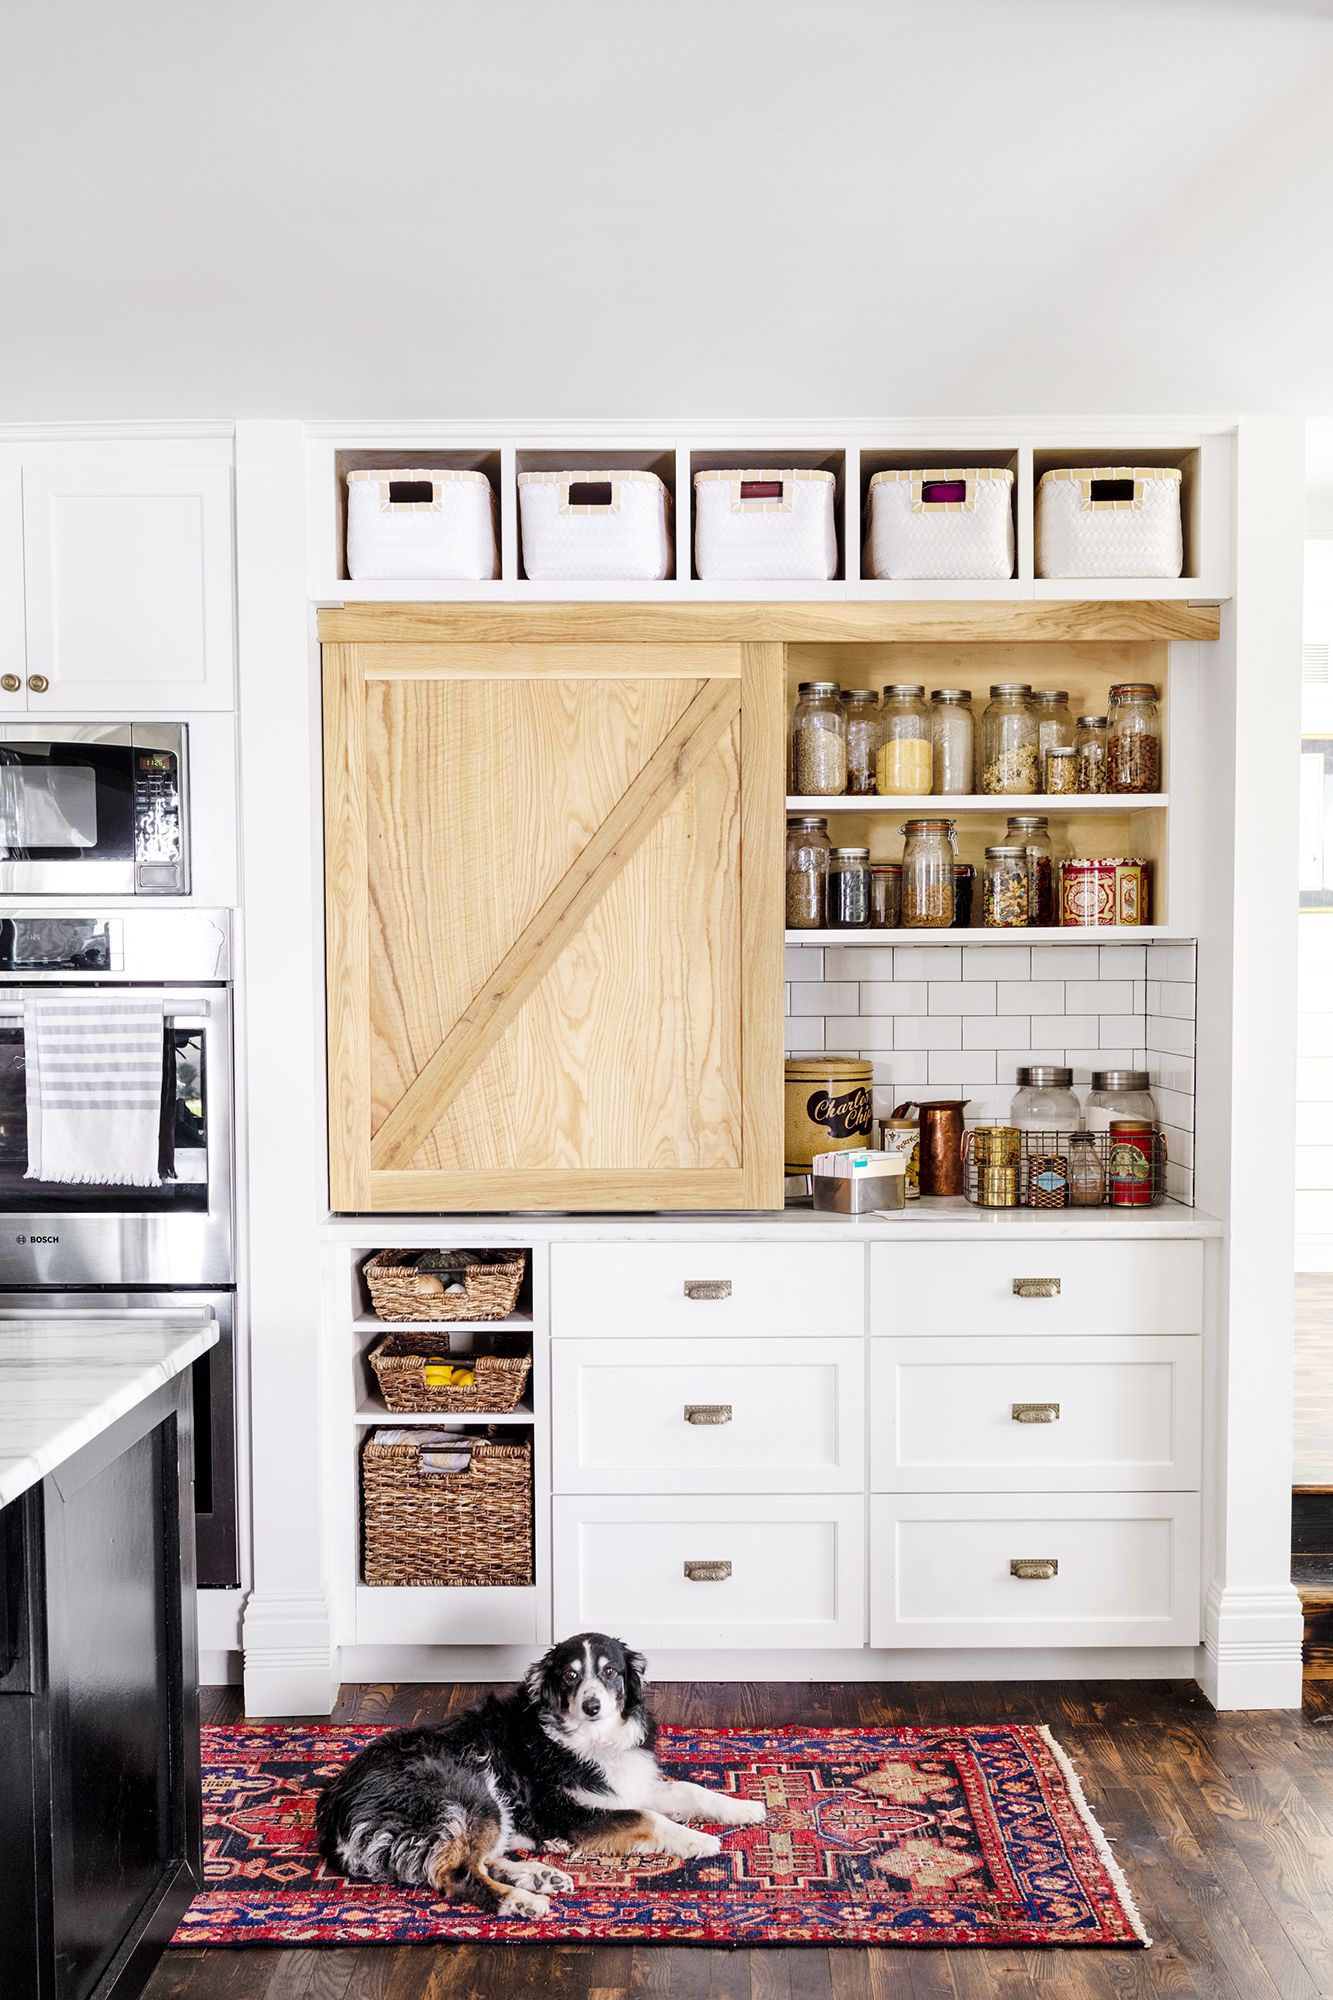 30 Pantry Organization Ideas and Tips to See Everything You Need